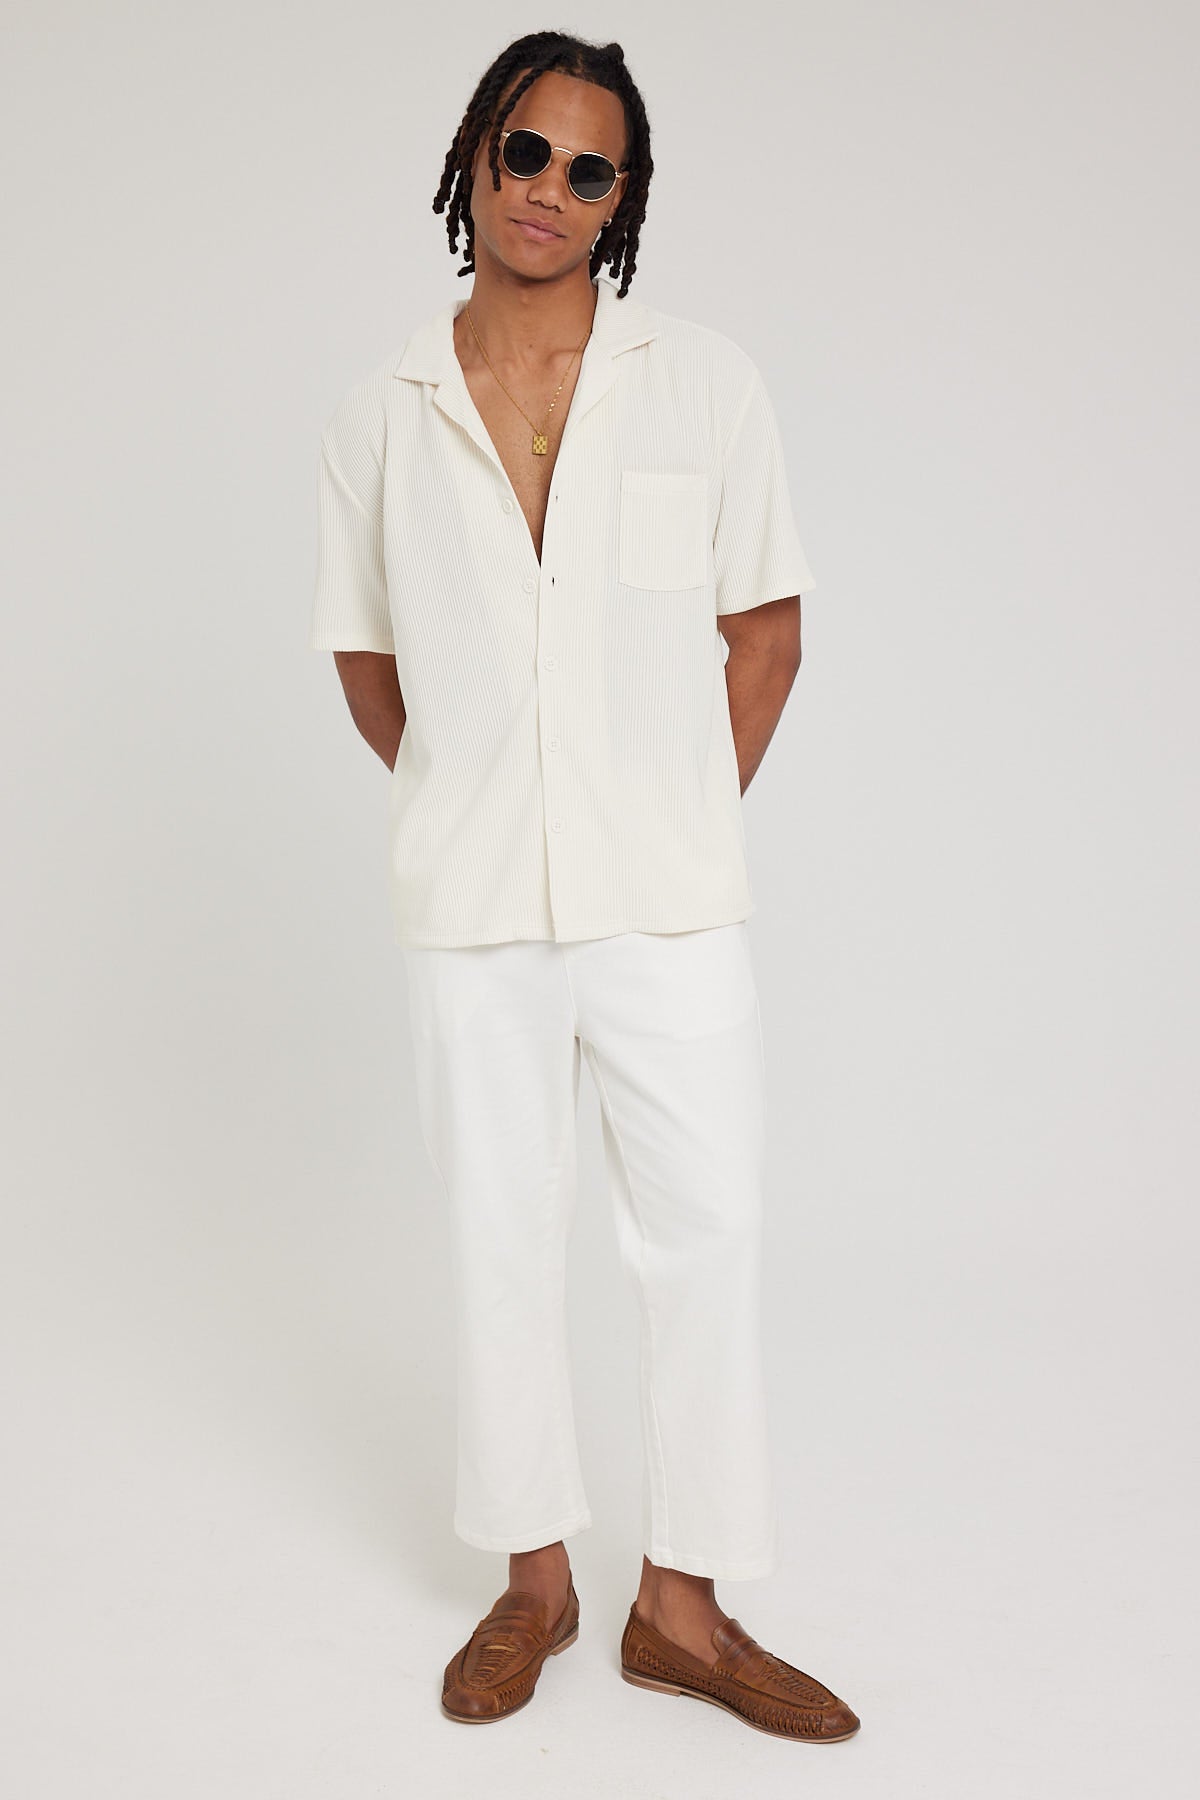 Common Need Madrid Relaxed Pant White